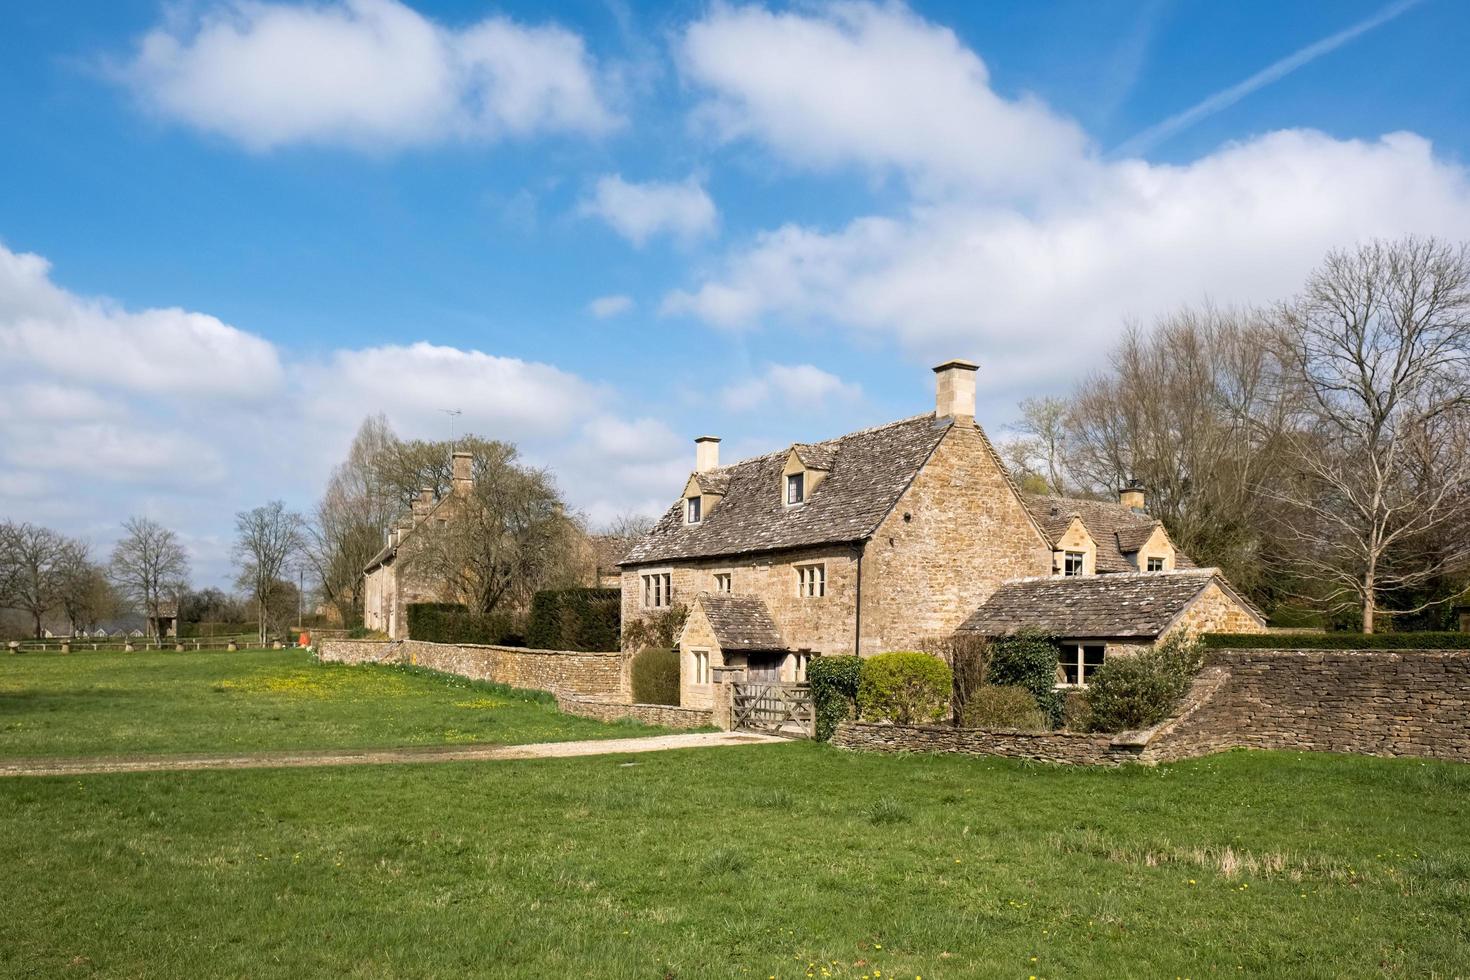 Picturesque Wyck Rissington, Gloucestershire, UK, 2017.  Village in the Cotswolds photo